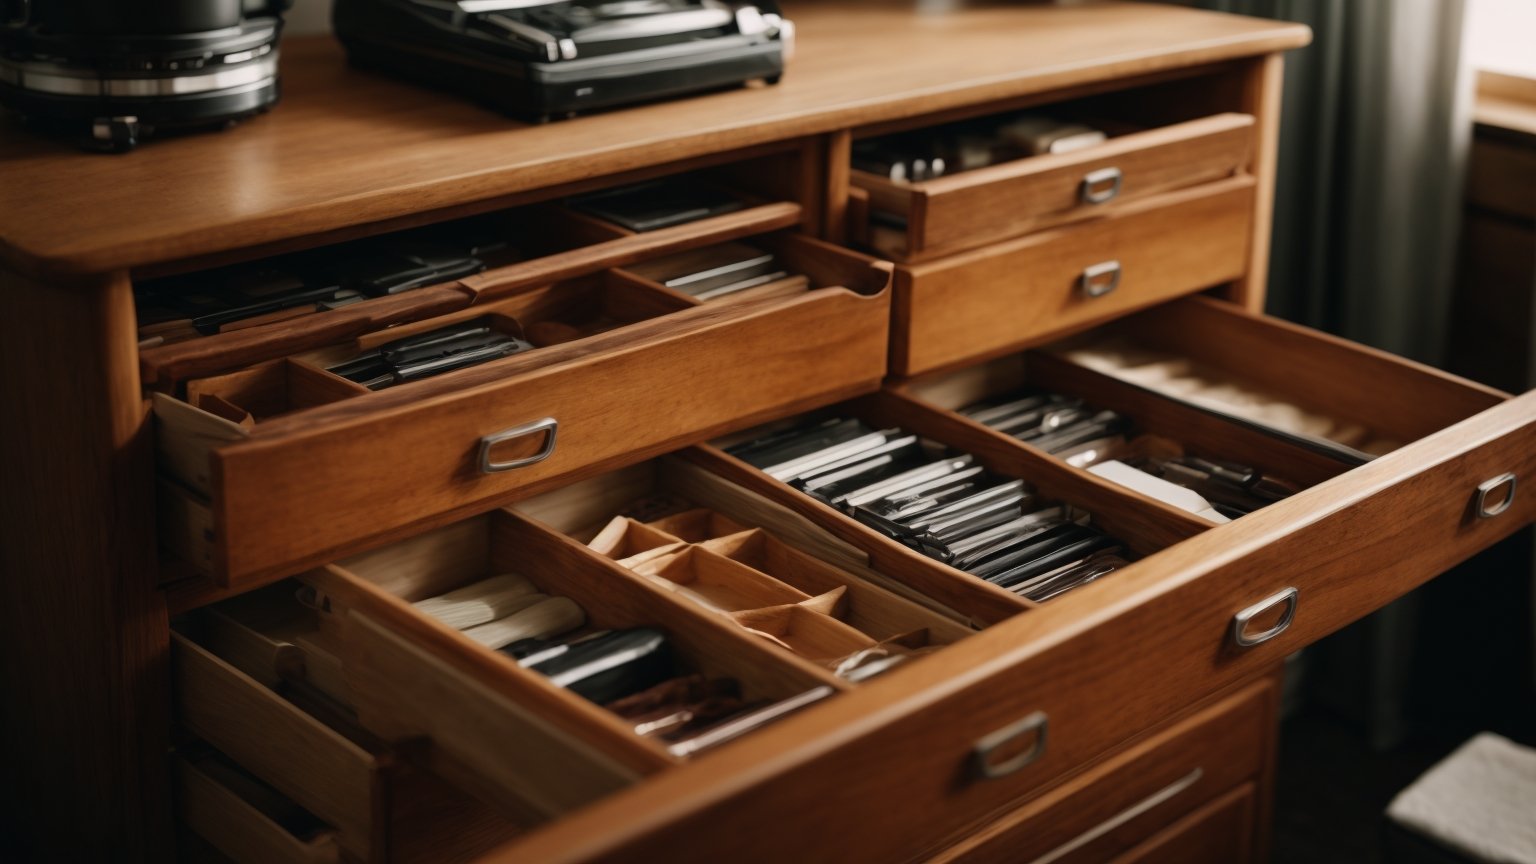 open-jammed-wooden-drawers